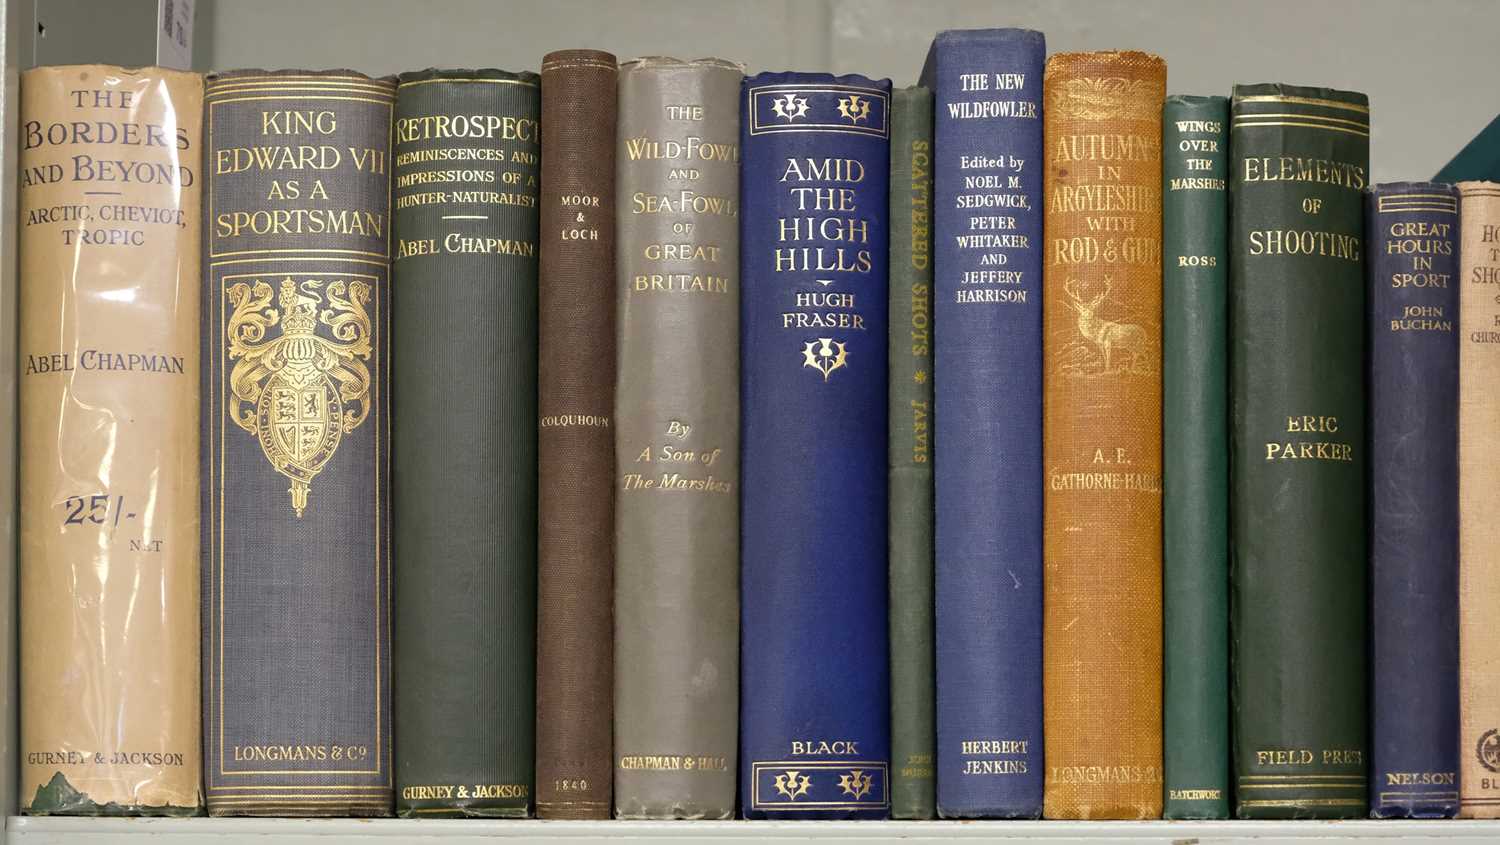 Lot 70 - Chapman (Abel). The Borders and Beyond, 1st edition, 1924, dust jacket, & 29 others, field sports